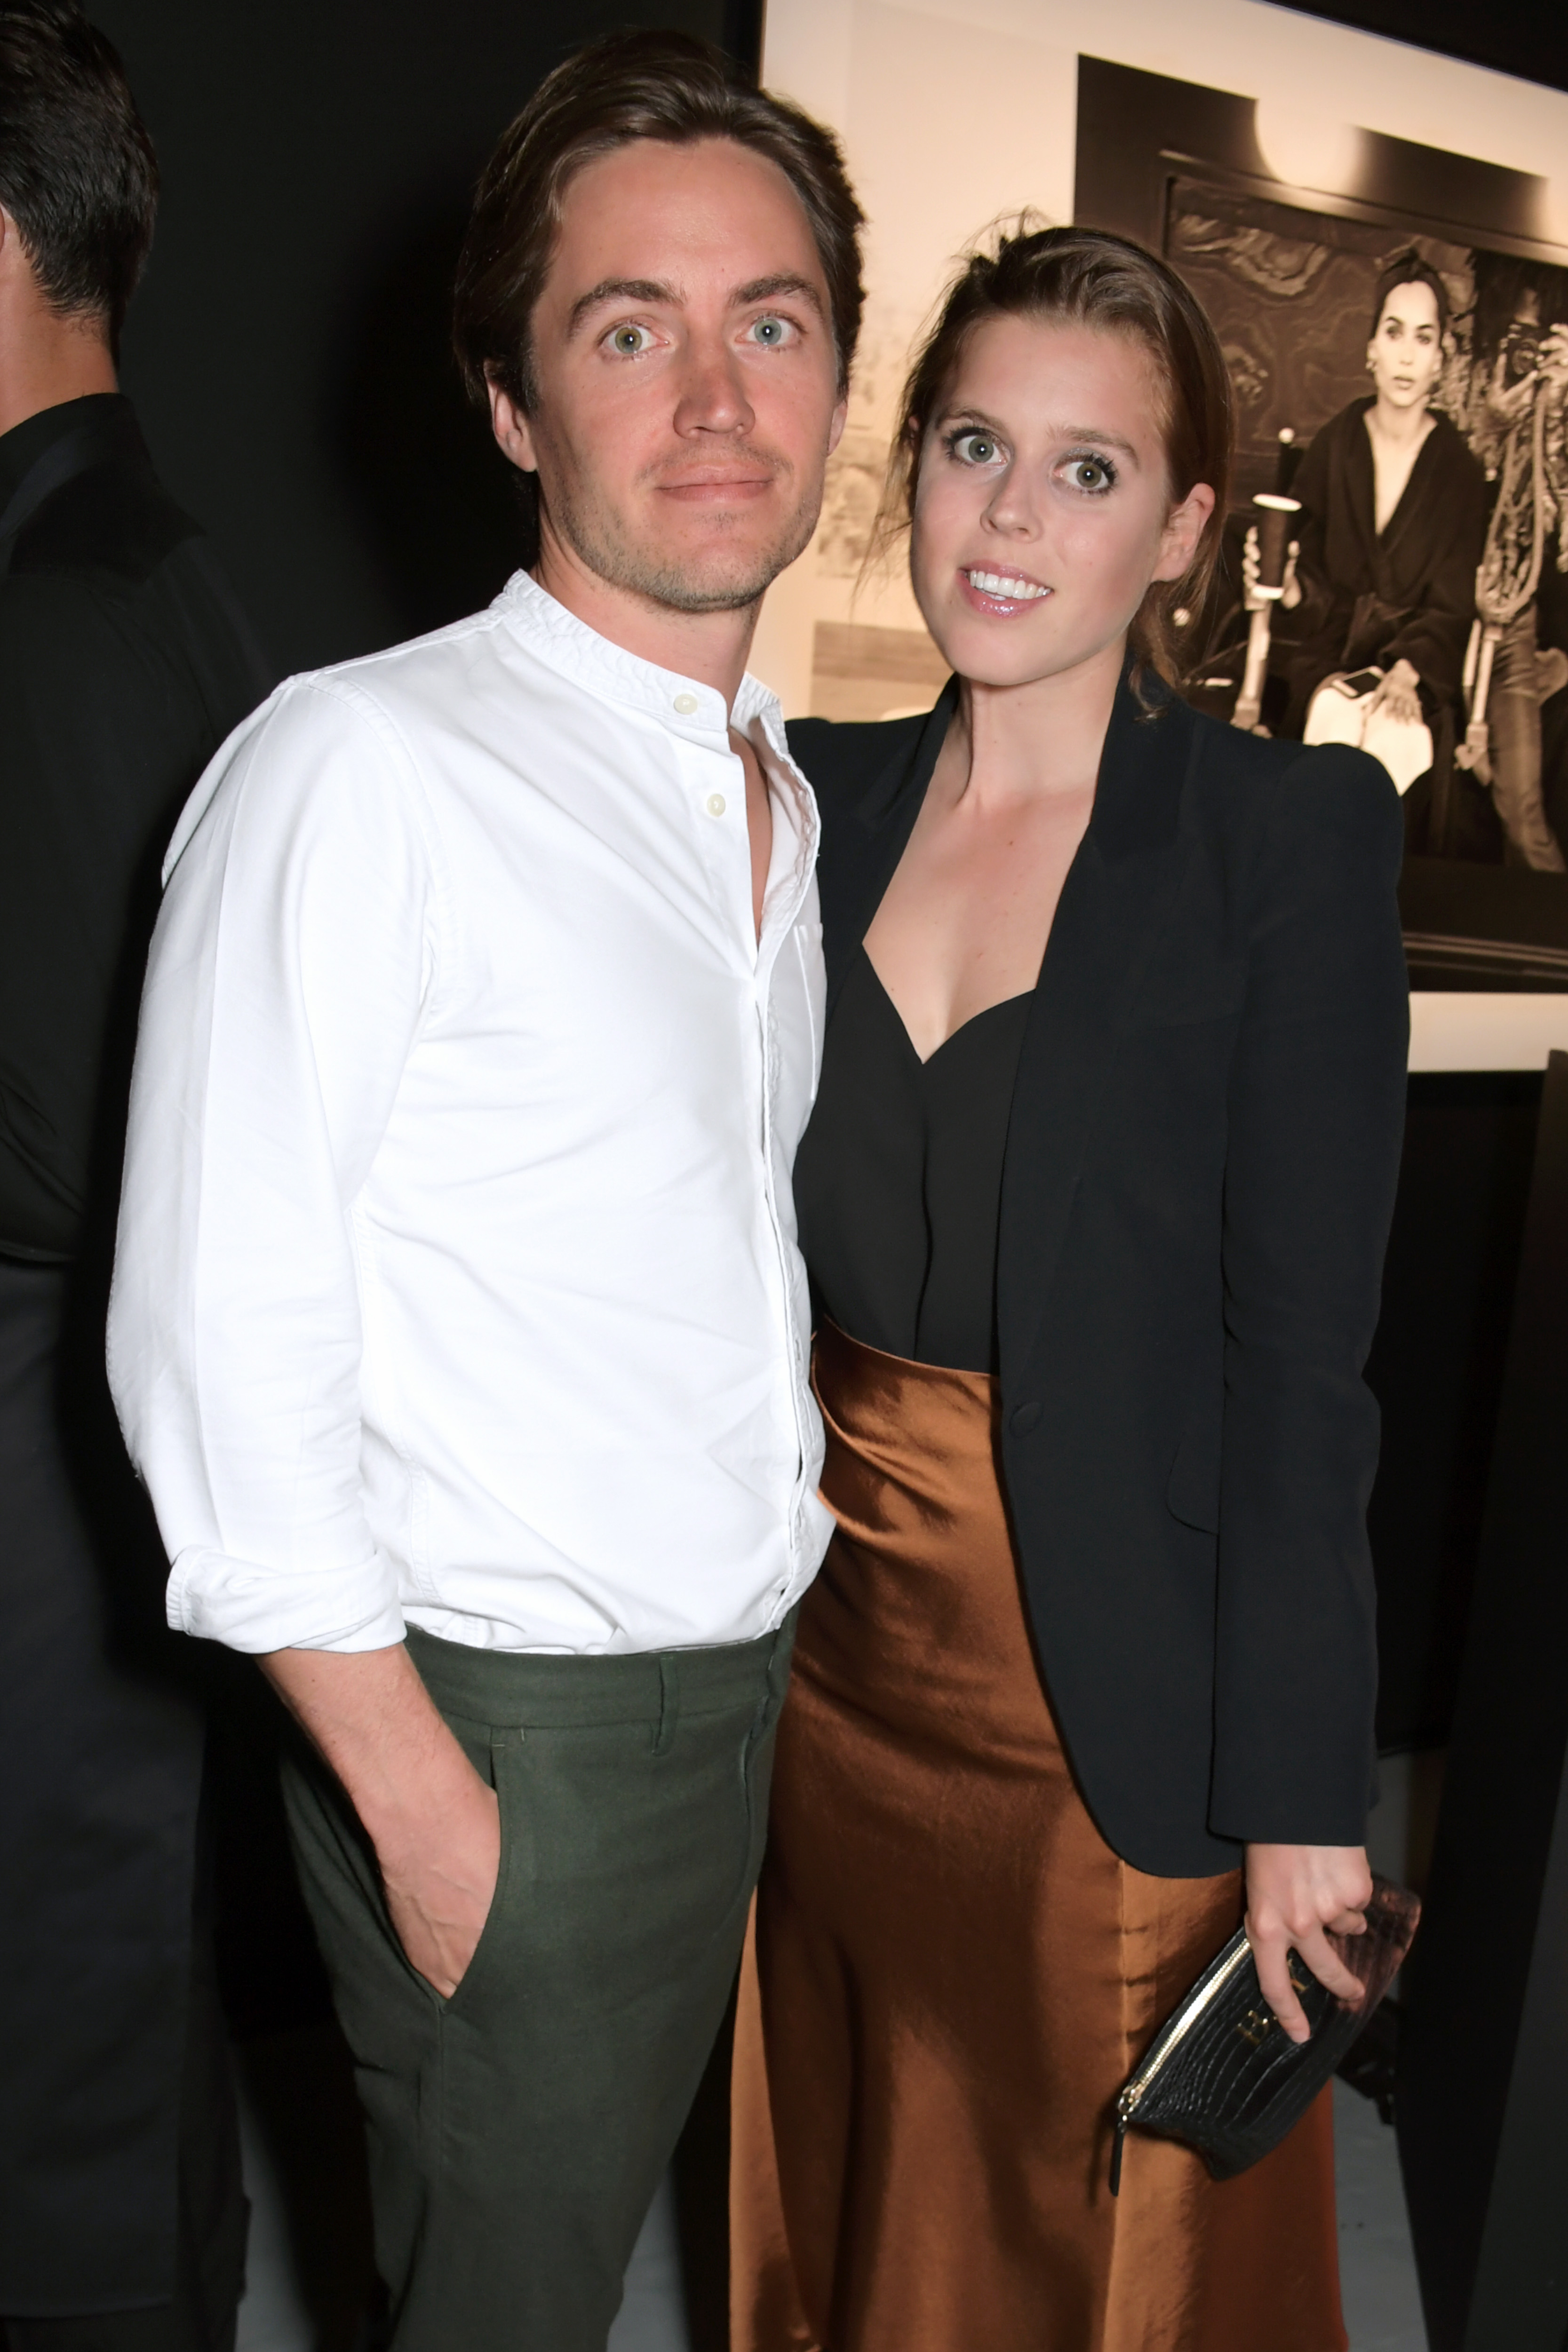 Edoardo Mapelli Mozzi and Princess Beatrice of York attend attends the Lenny Kravitz & Dom Perignon "Assemblage" exhibition, the launch Of Lenny Kravitz' UK Photography Exhibition, on July 10, 2019, in London, England. | Source: Getty Images